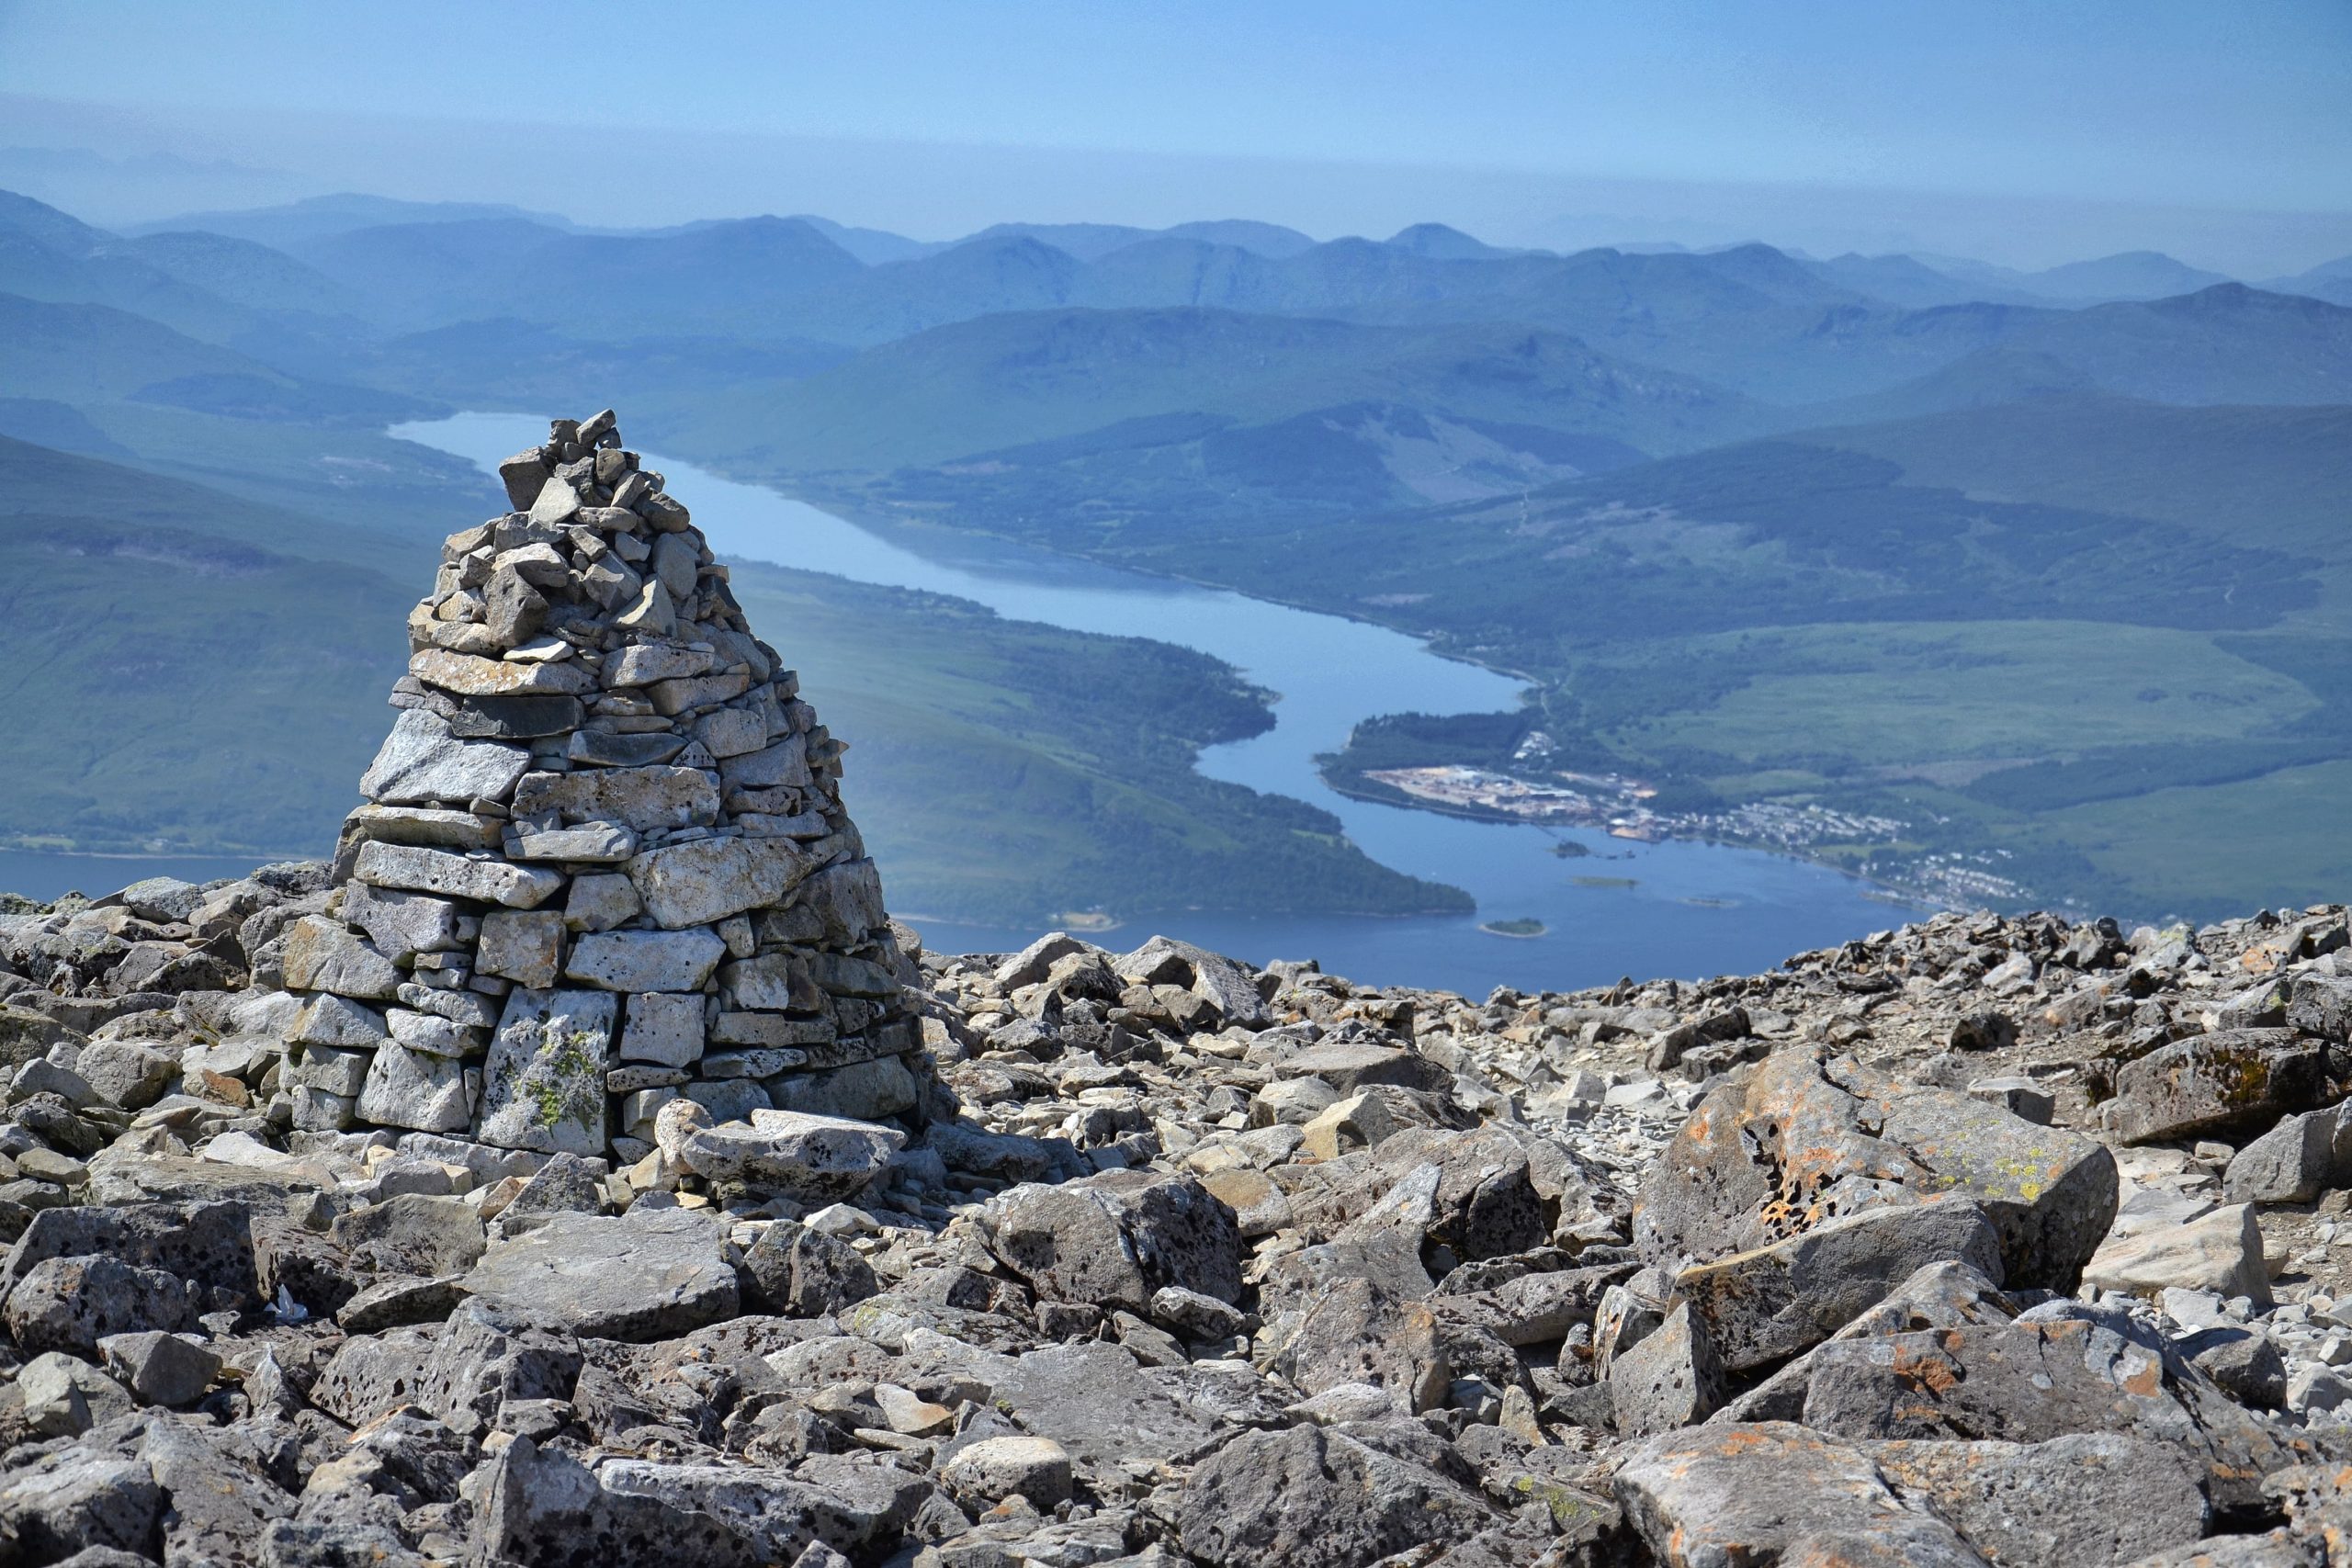 The view from the peak of Ben Nevis as part of the National Three Peaks challenge